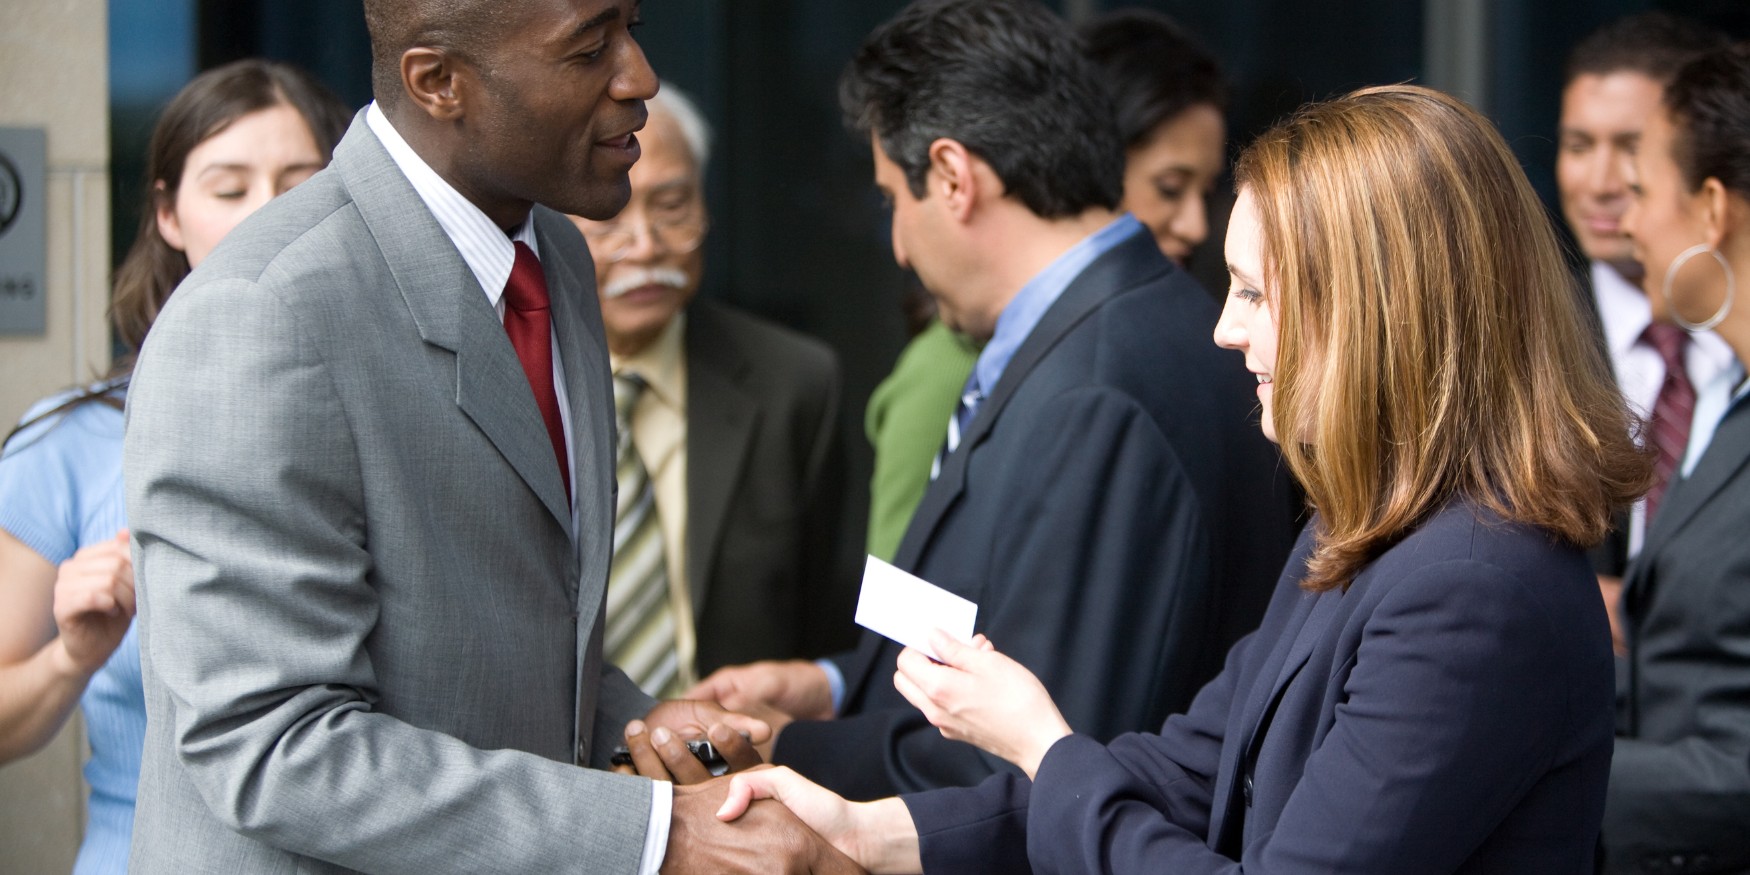 The Power of Business Cards in Small Business and Networking Events